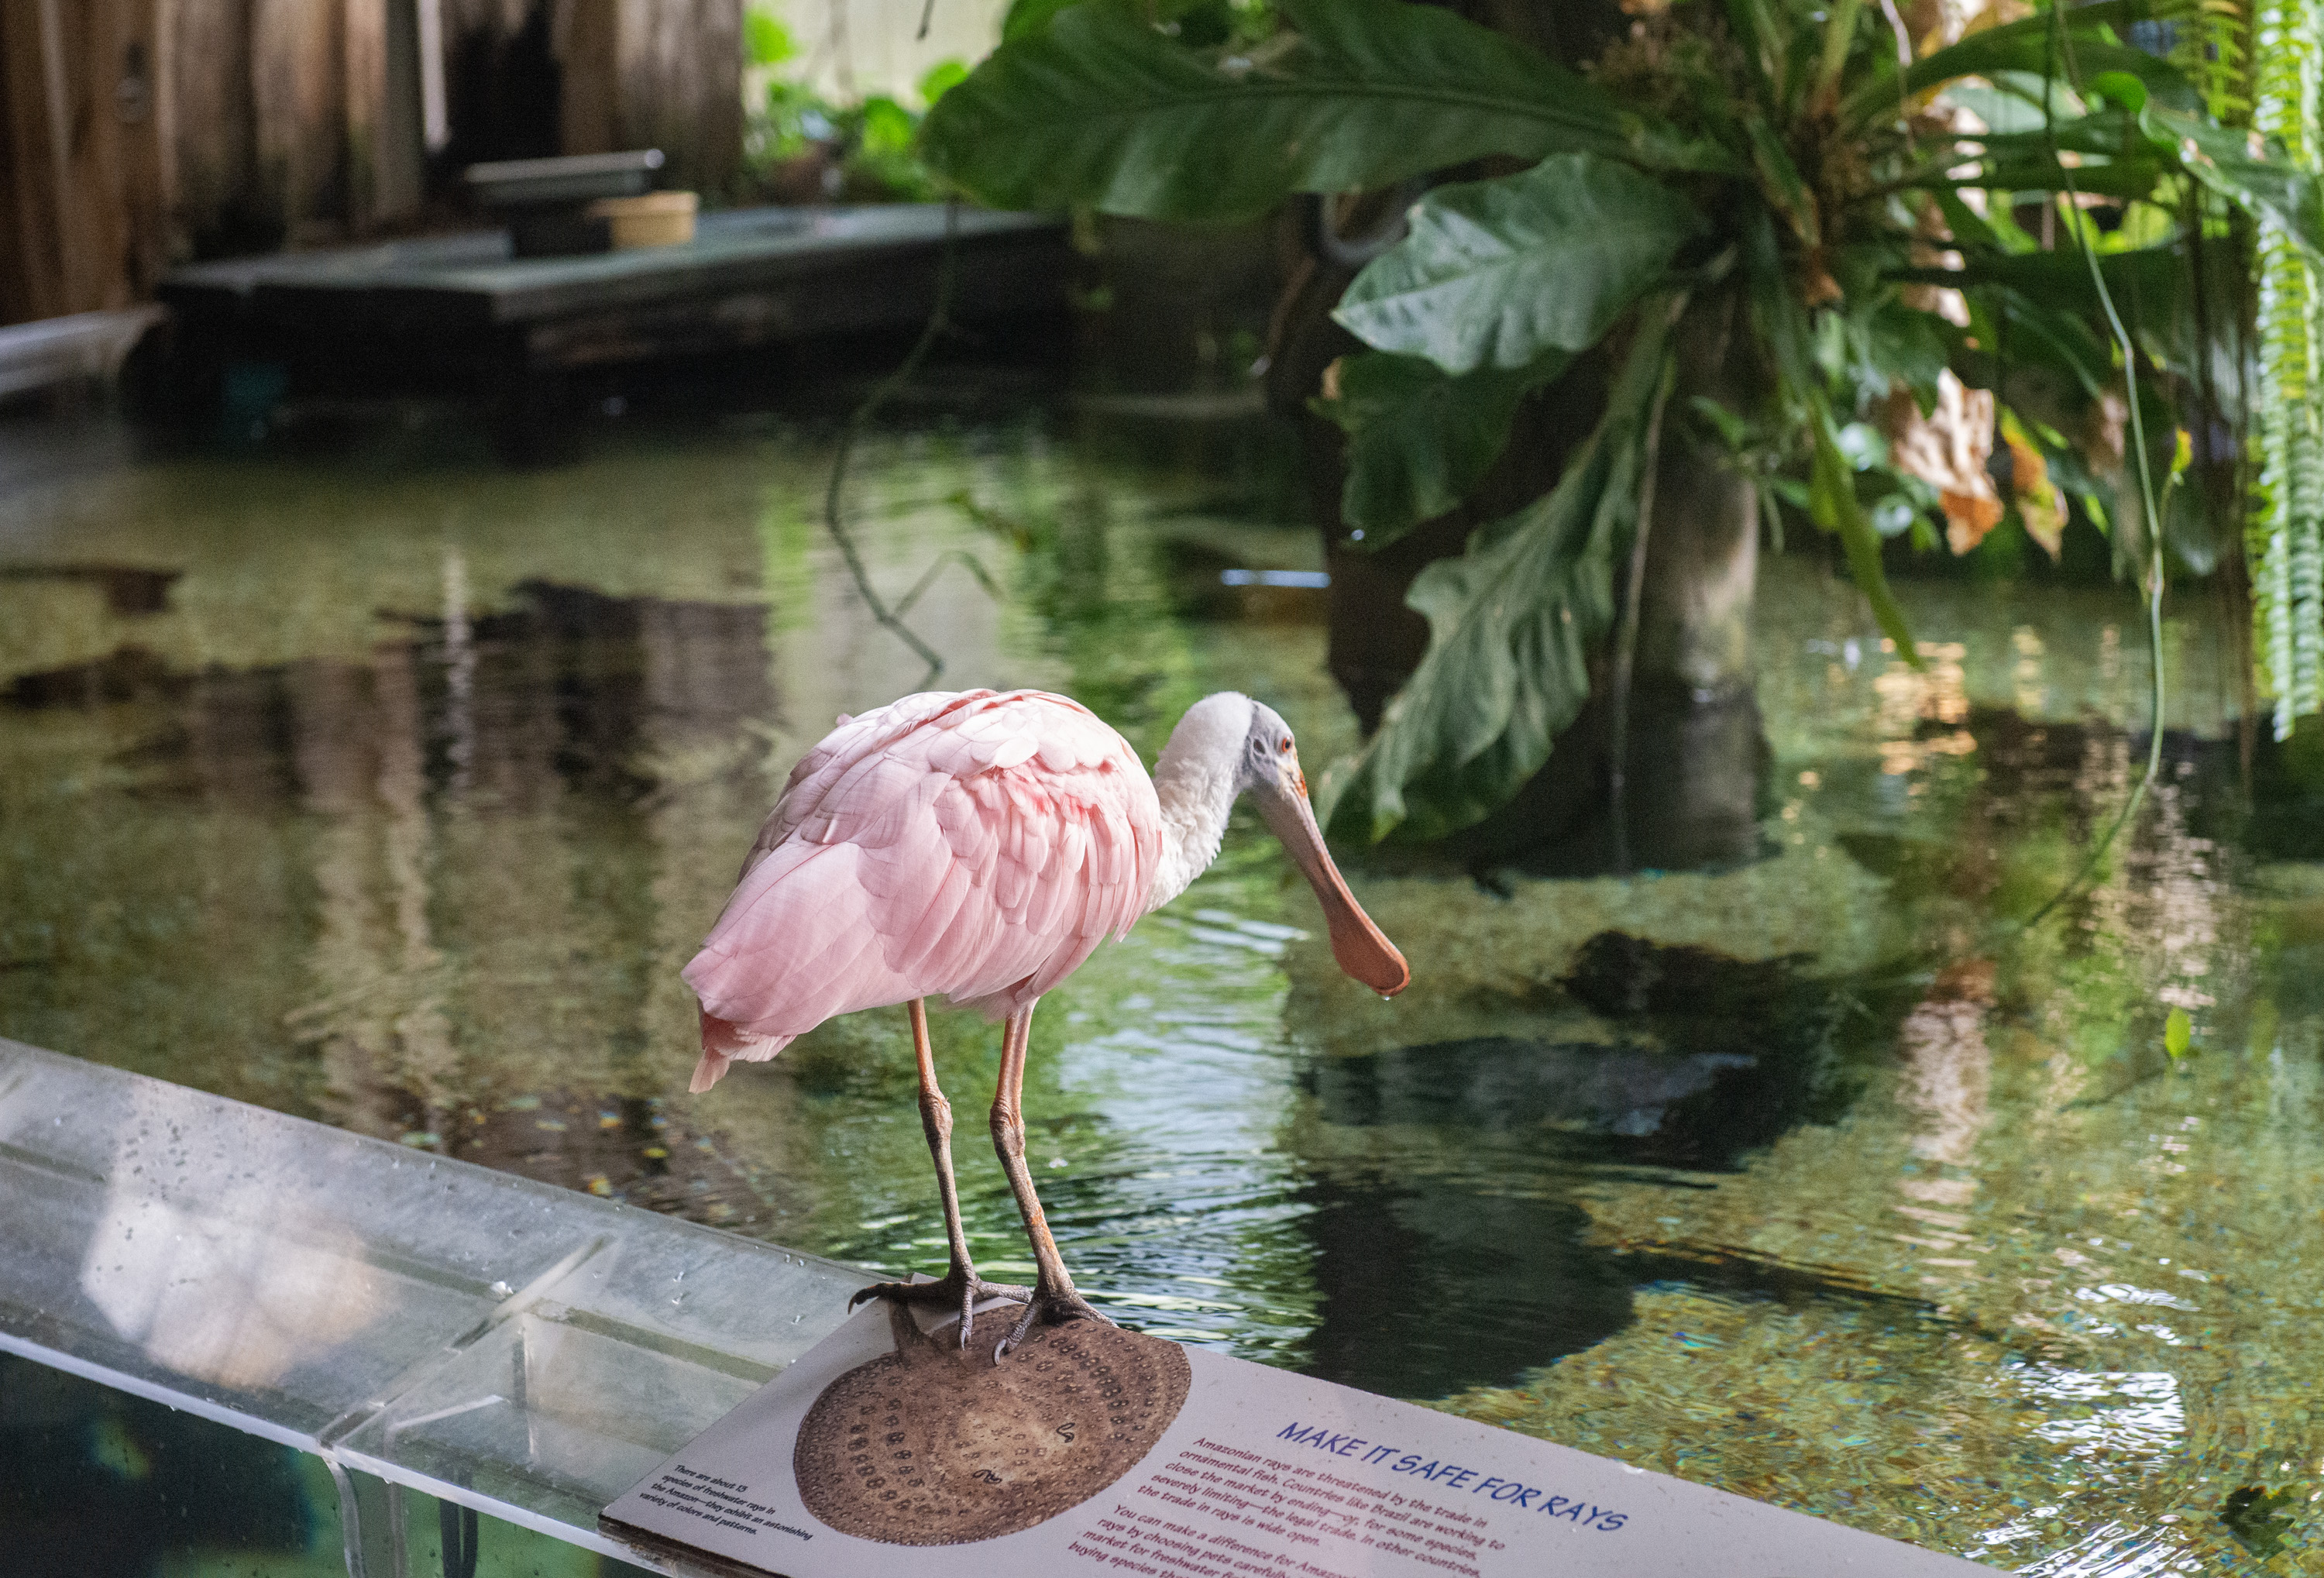 A roseate spoonbill peers into the water in the Amazonia exhibit.